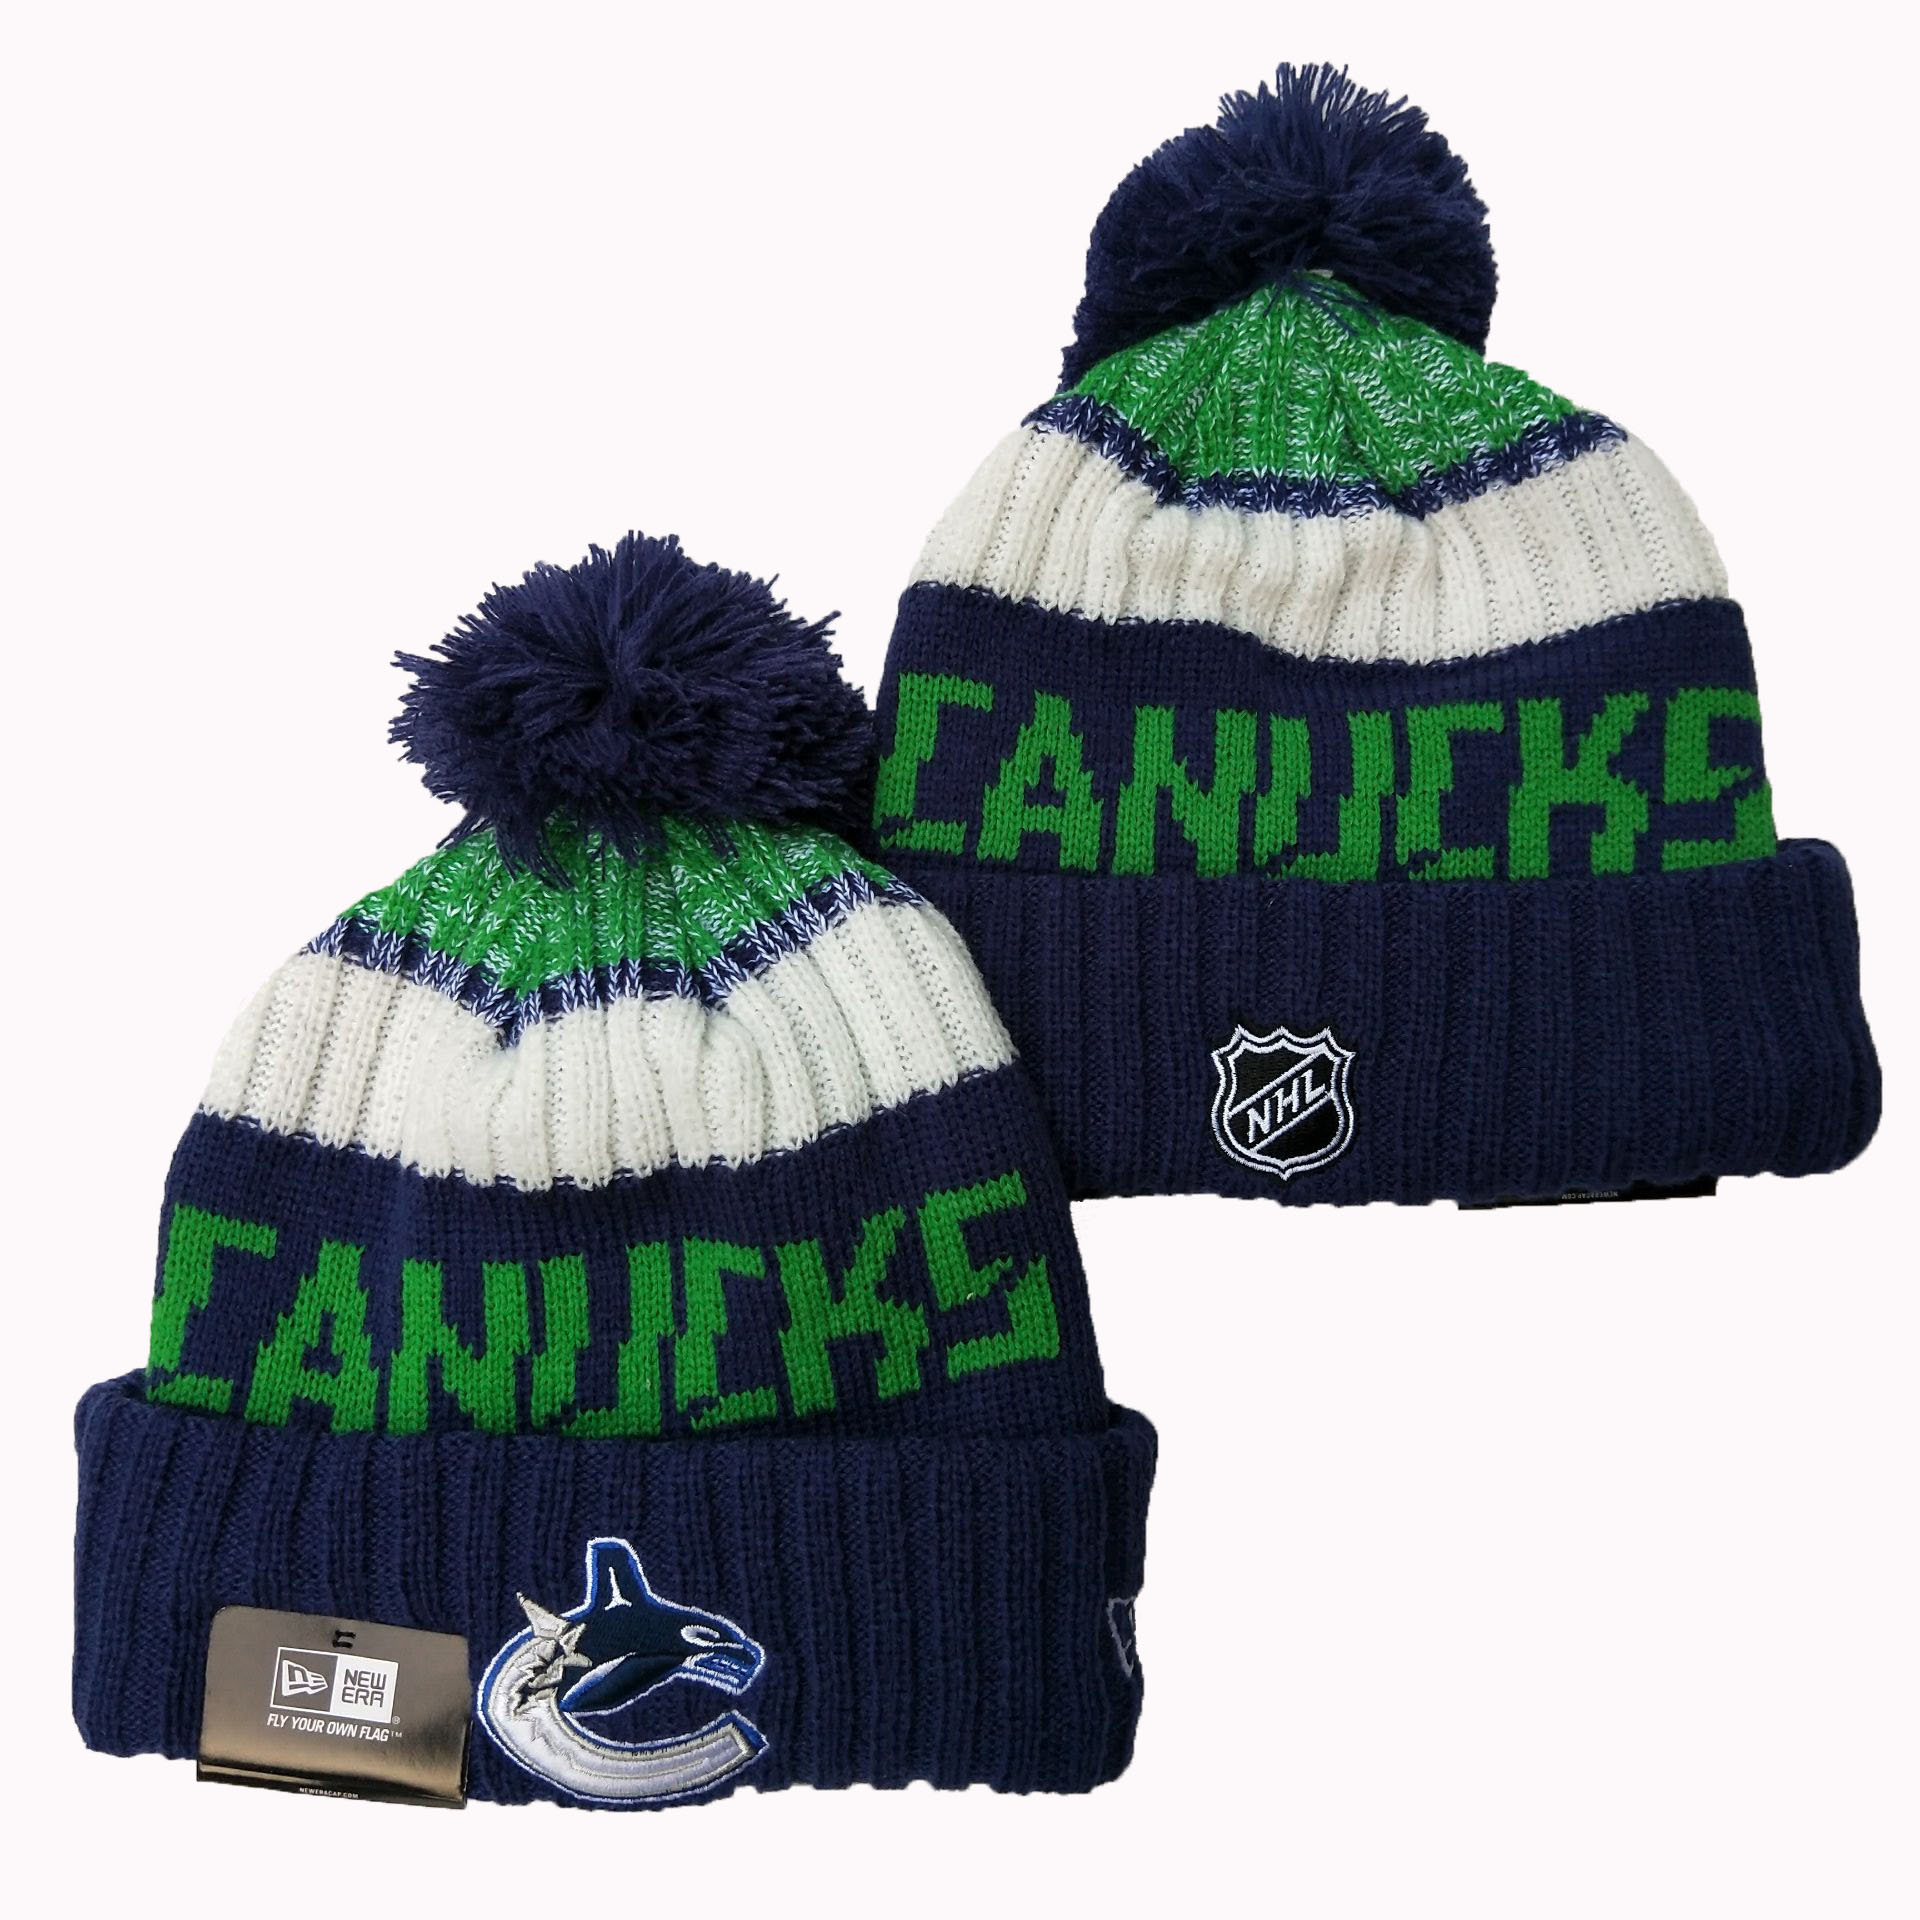 NHL Vancouver Canucks Beanies Knit Hats-YD1613